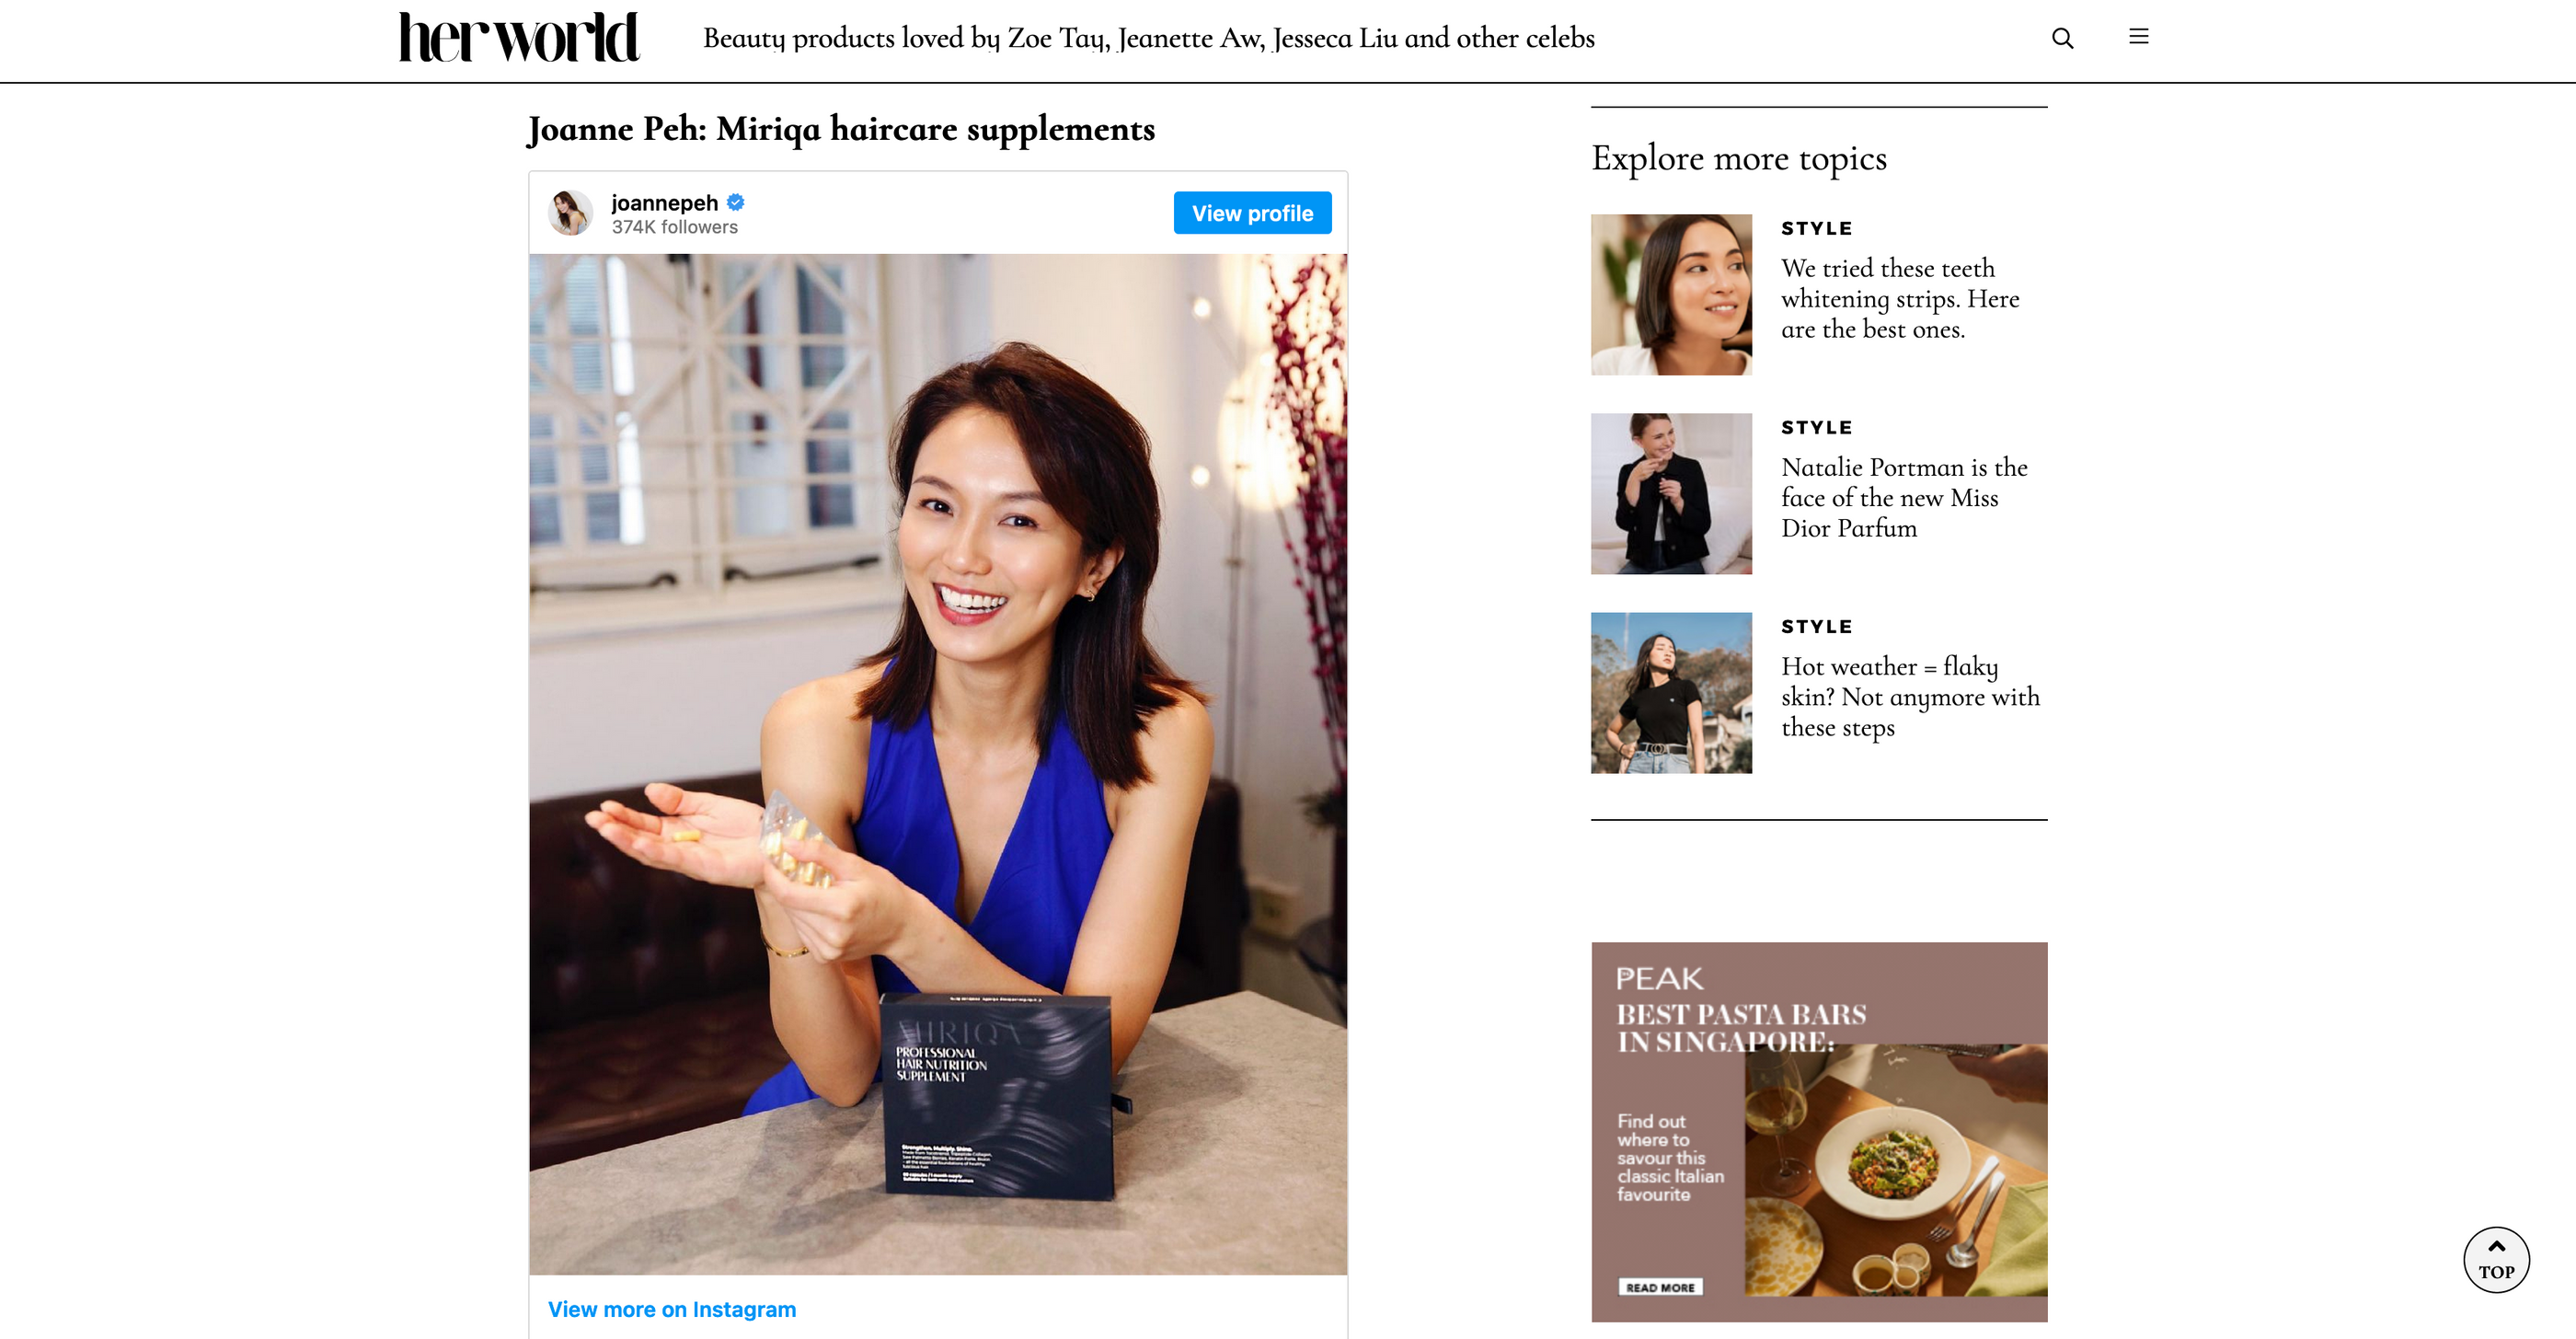 Beauty Products Loved By Chantalle Ng, Joanne Peh And Other Celebs by Her World Singapore